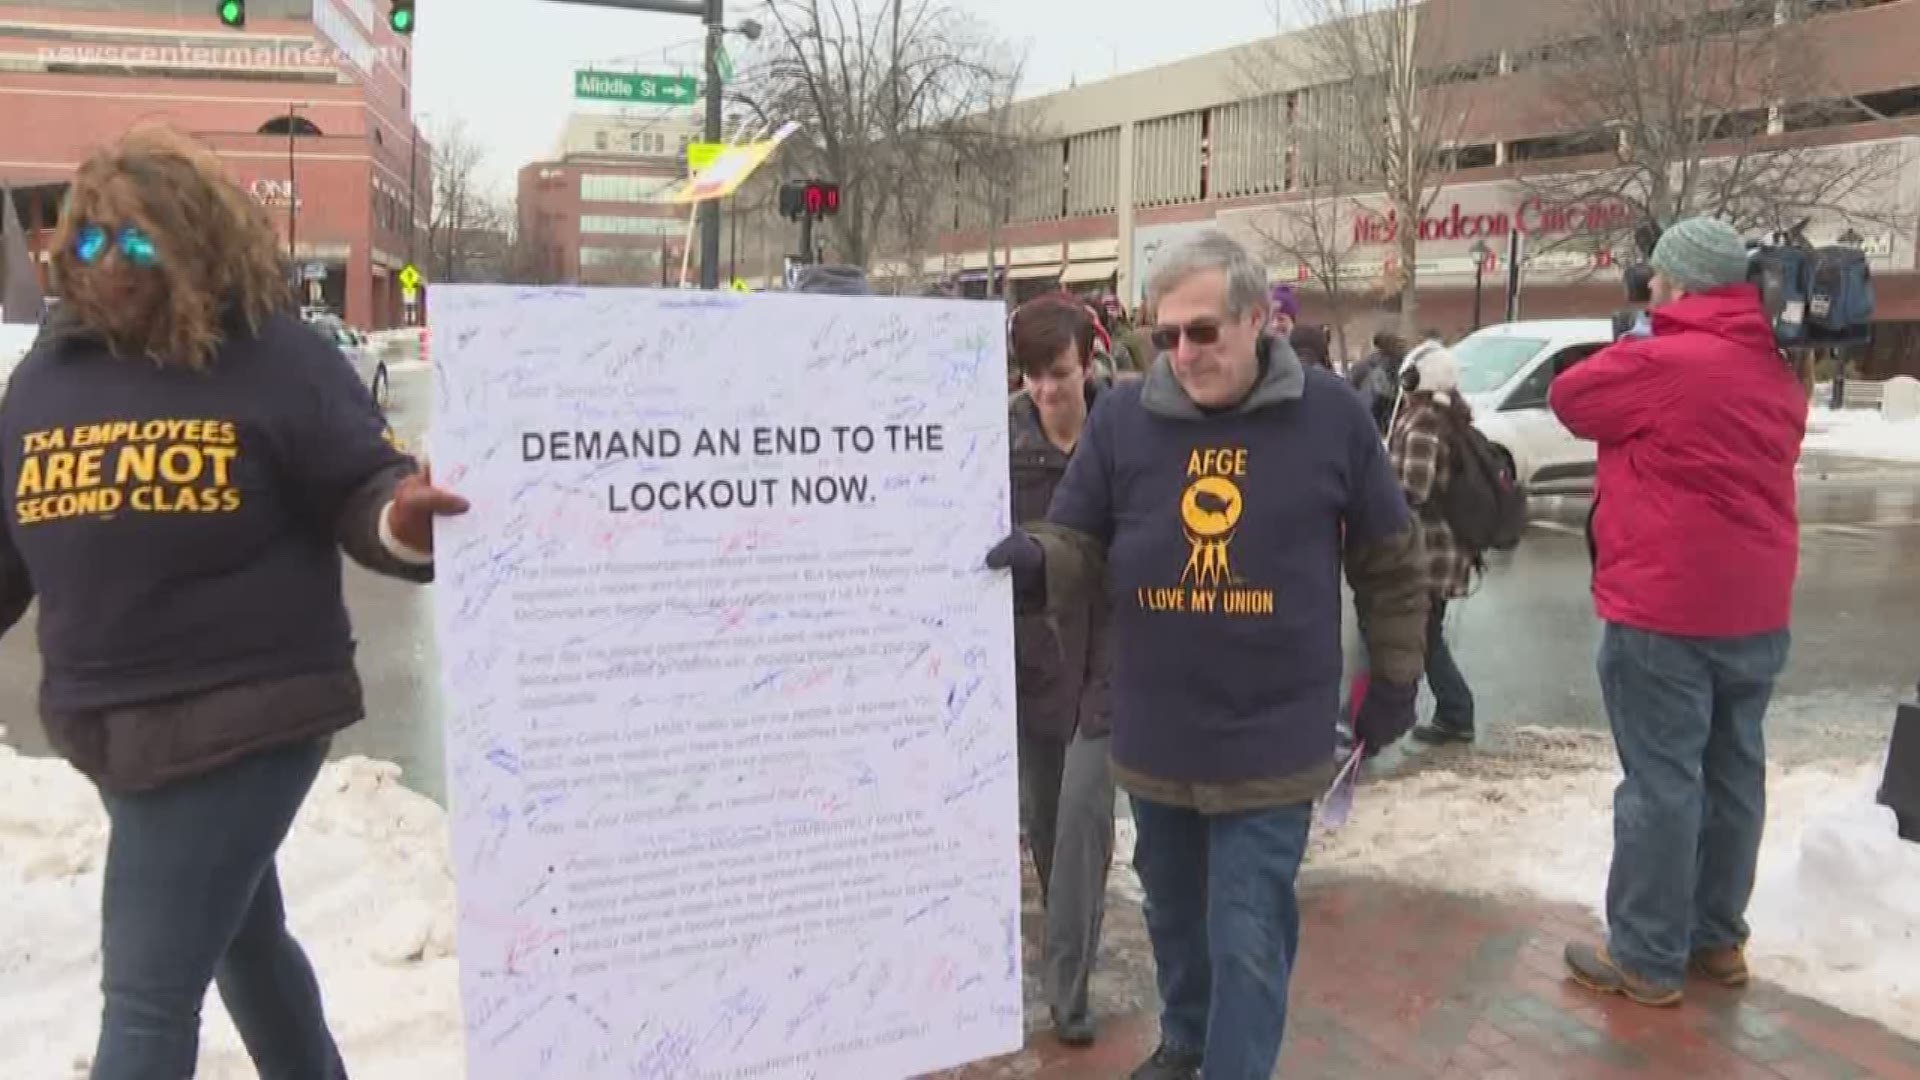 Protestors in Maine are calling on Senator Susan Collins to end the partial federal government shutdown.